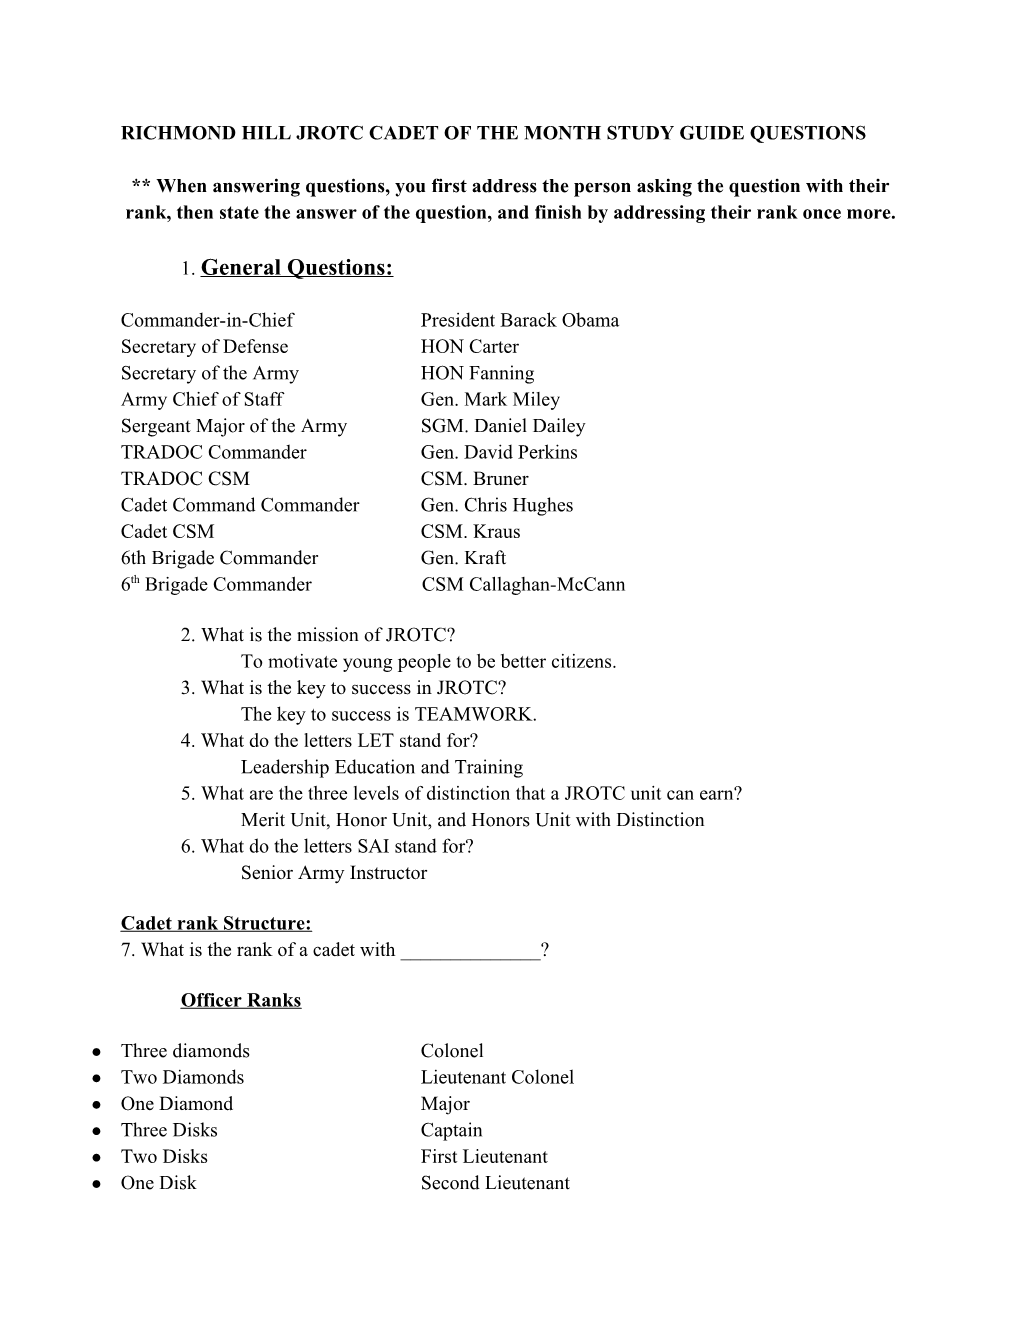 Richmond Hill JROTC Cadet of the Month Study Guide Questions